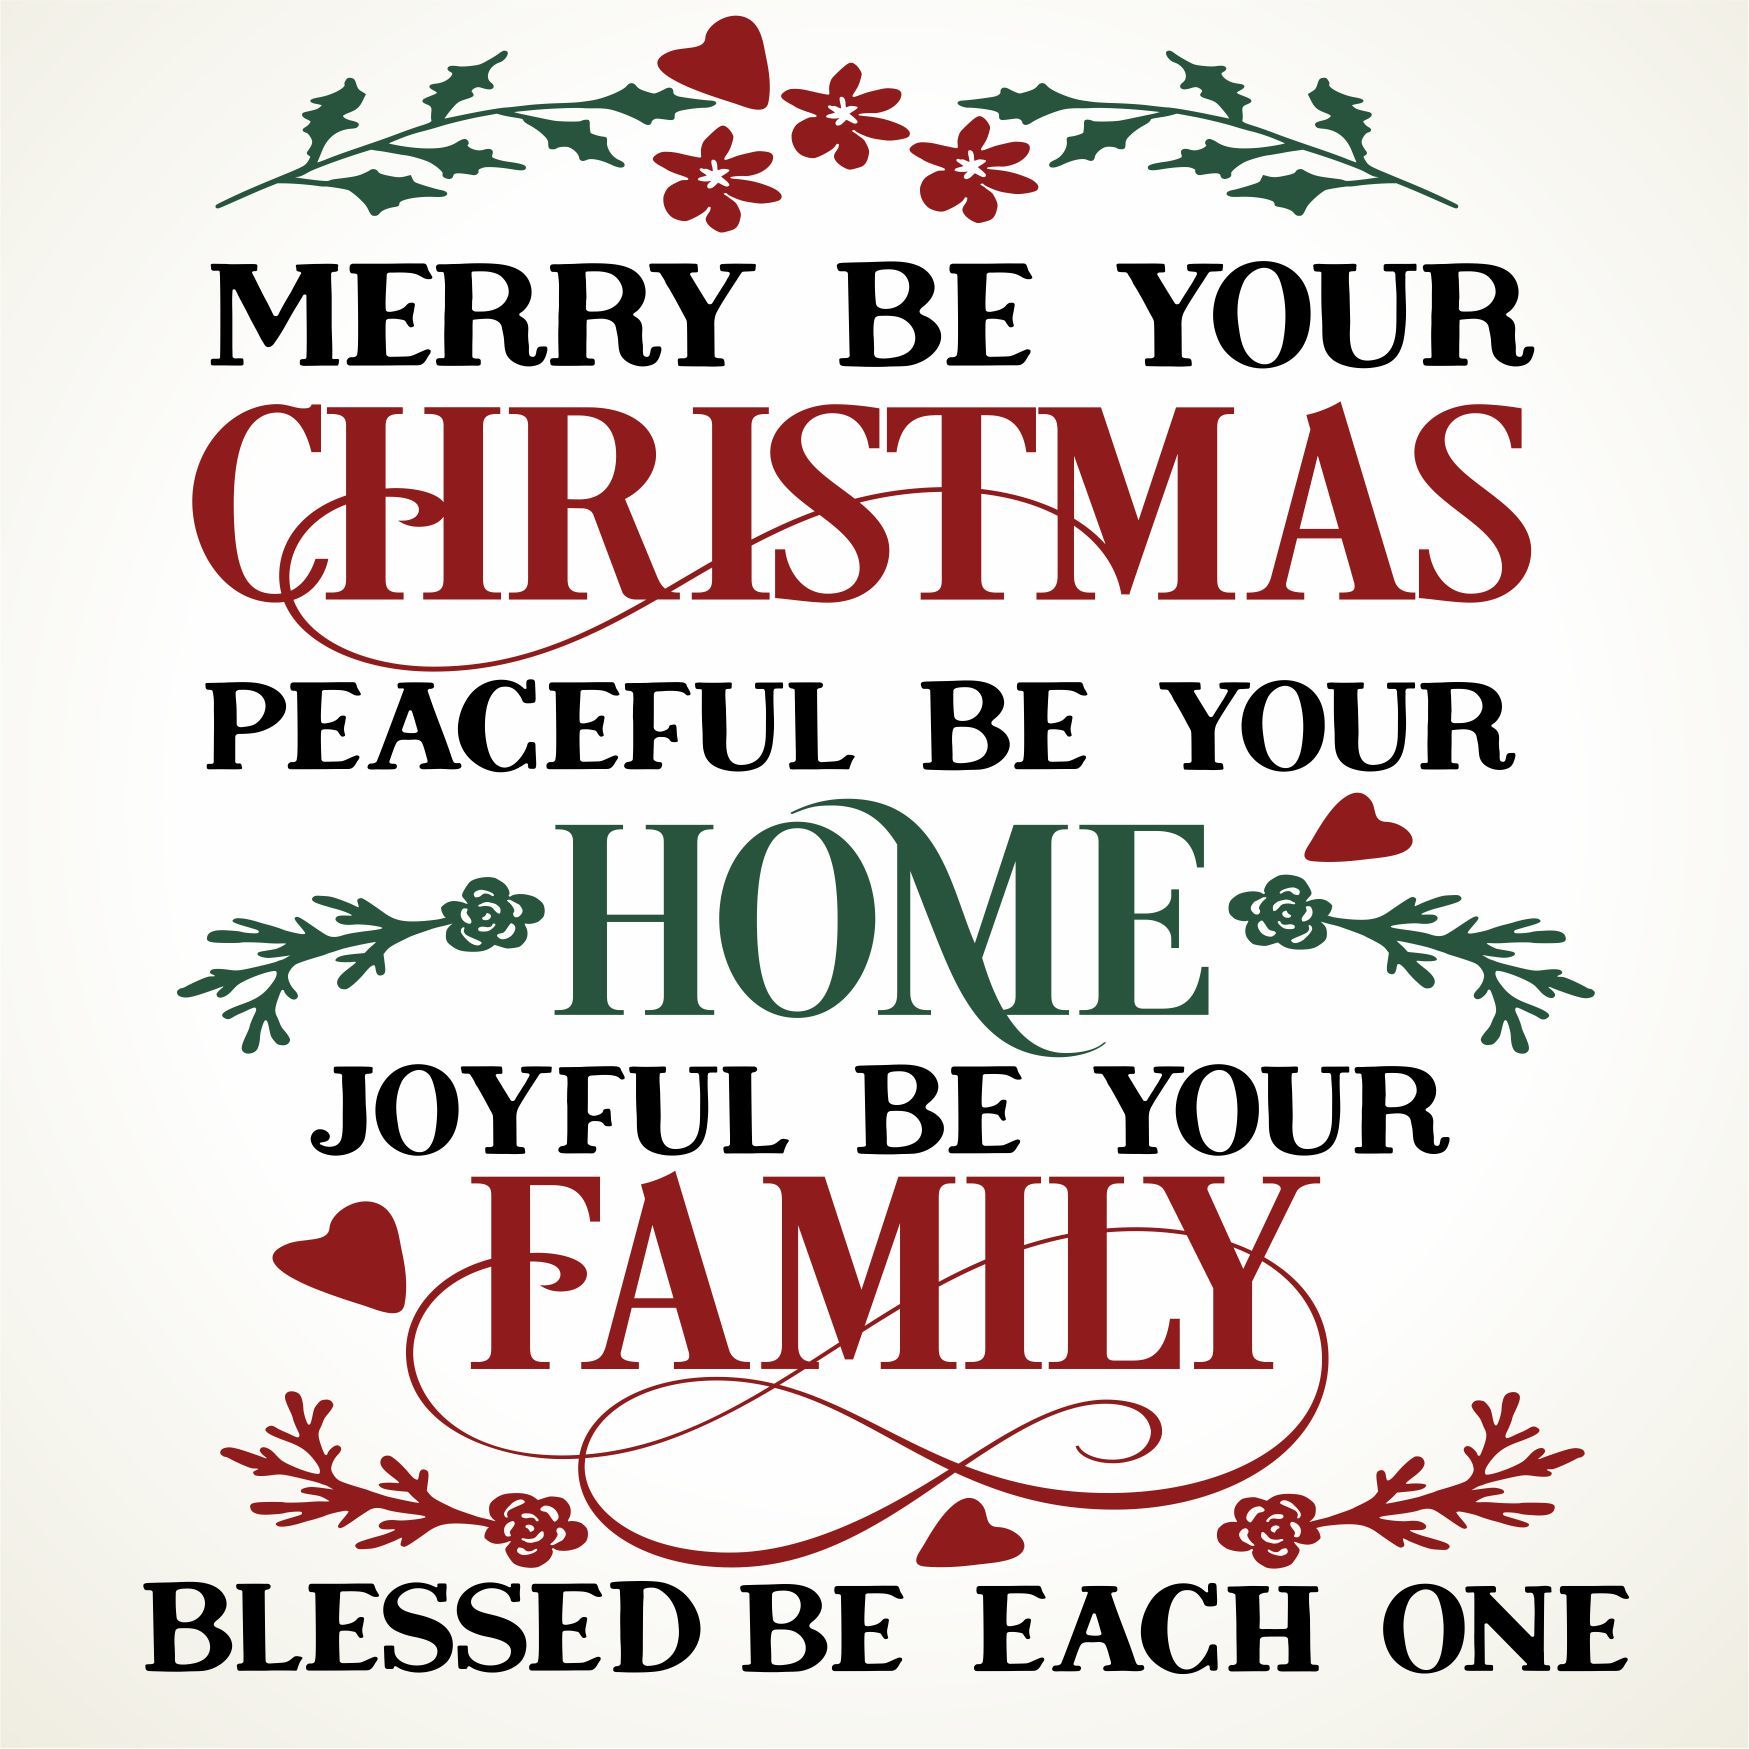 Kerst Tegeltje Merry be you Christmas peaceful be your home Joyfull be your family Blessed be each on